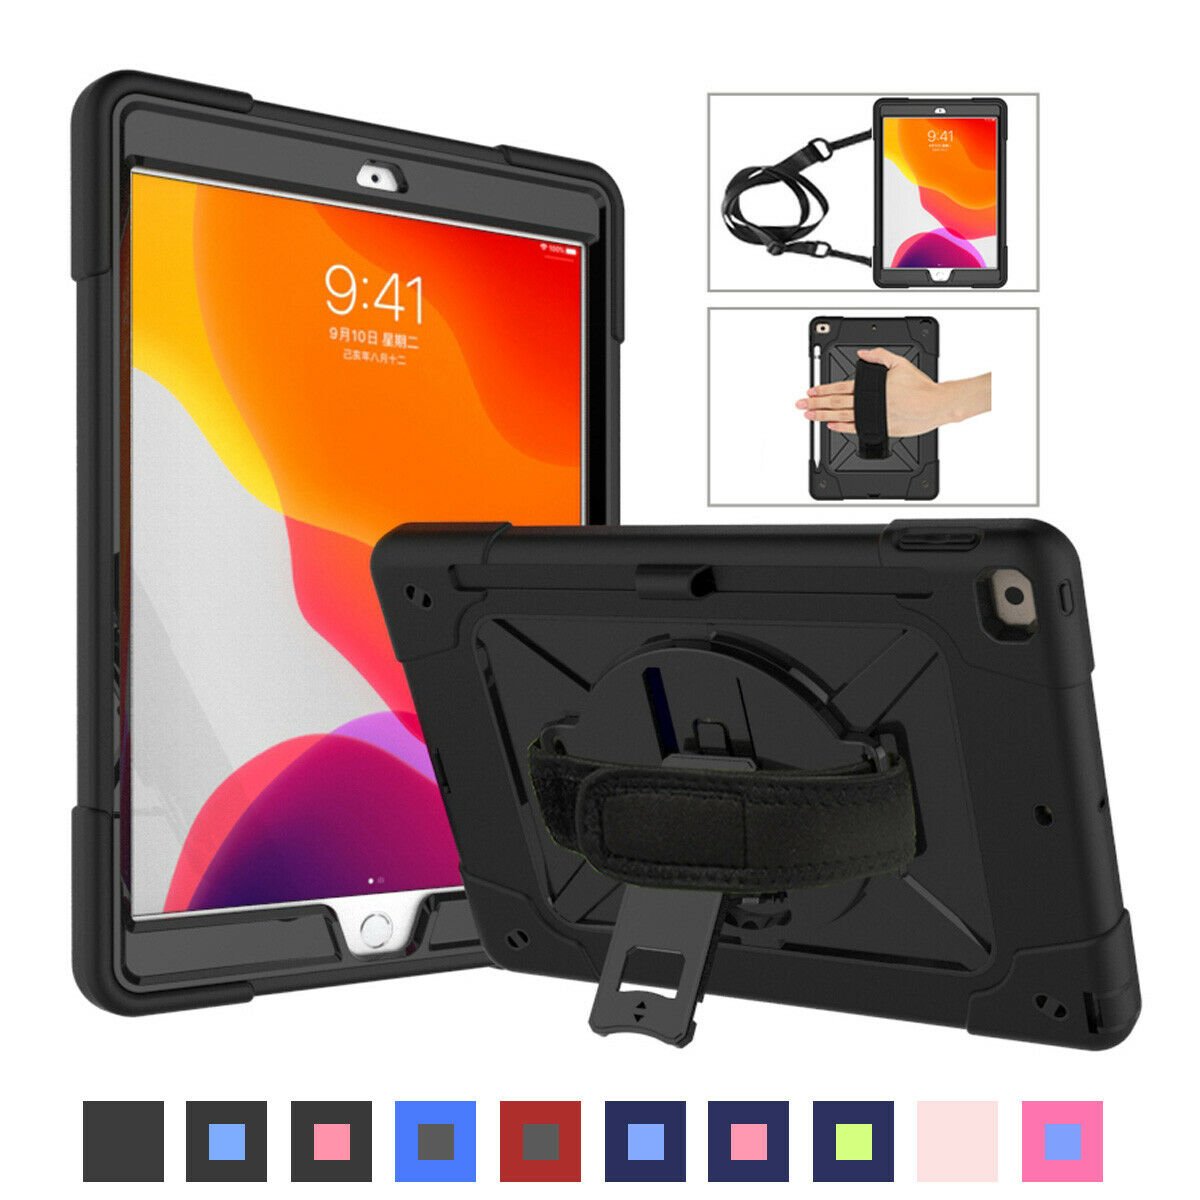 Hybrid Silicone Shoulder Strap Tablet Case For iPad 10.2" 7th Generation 2019 1